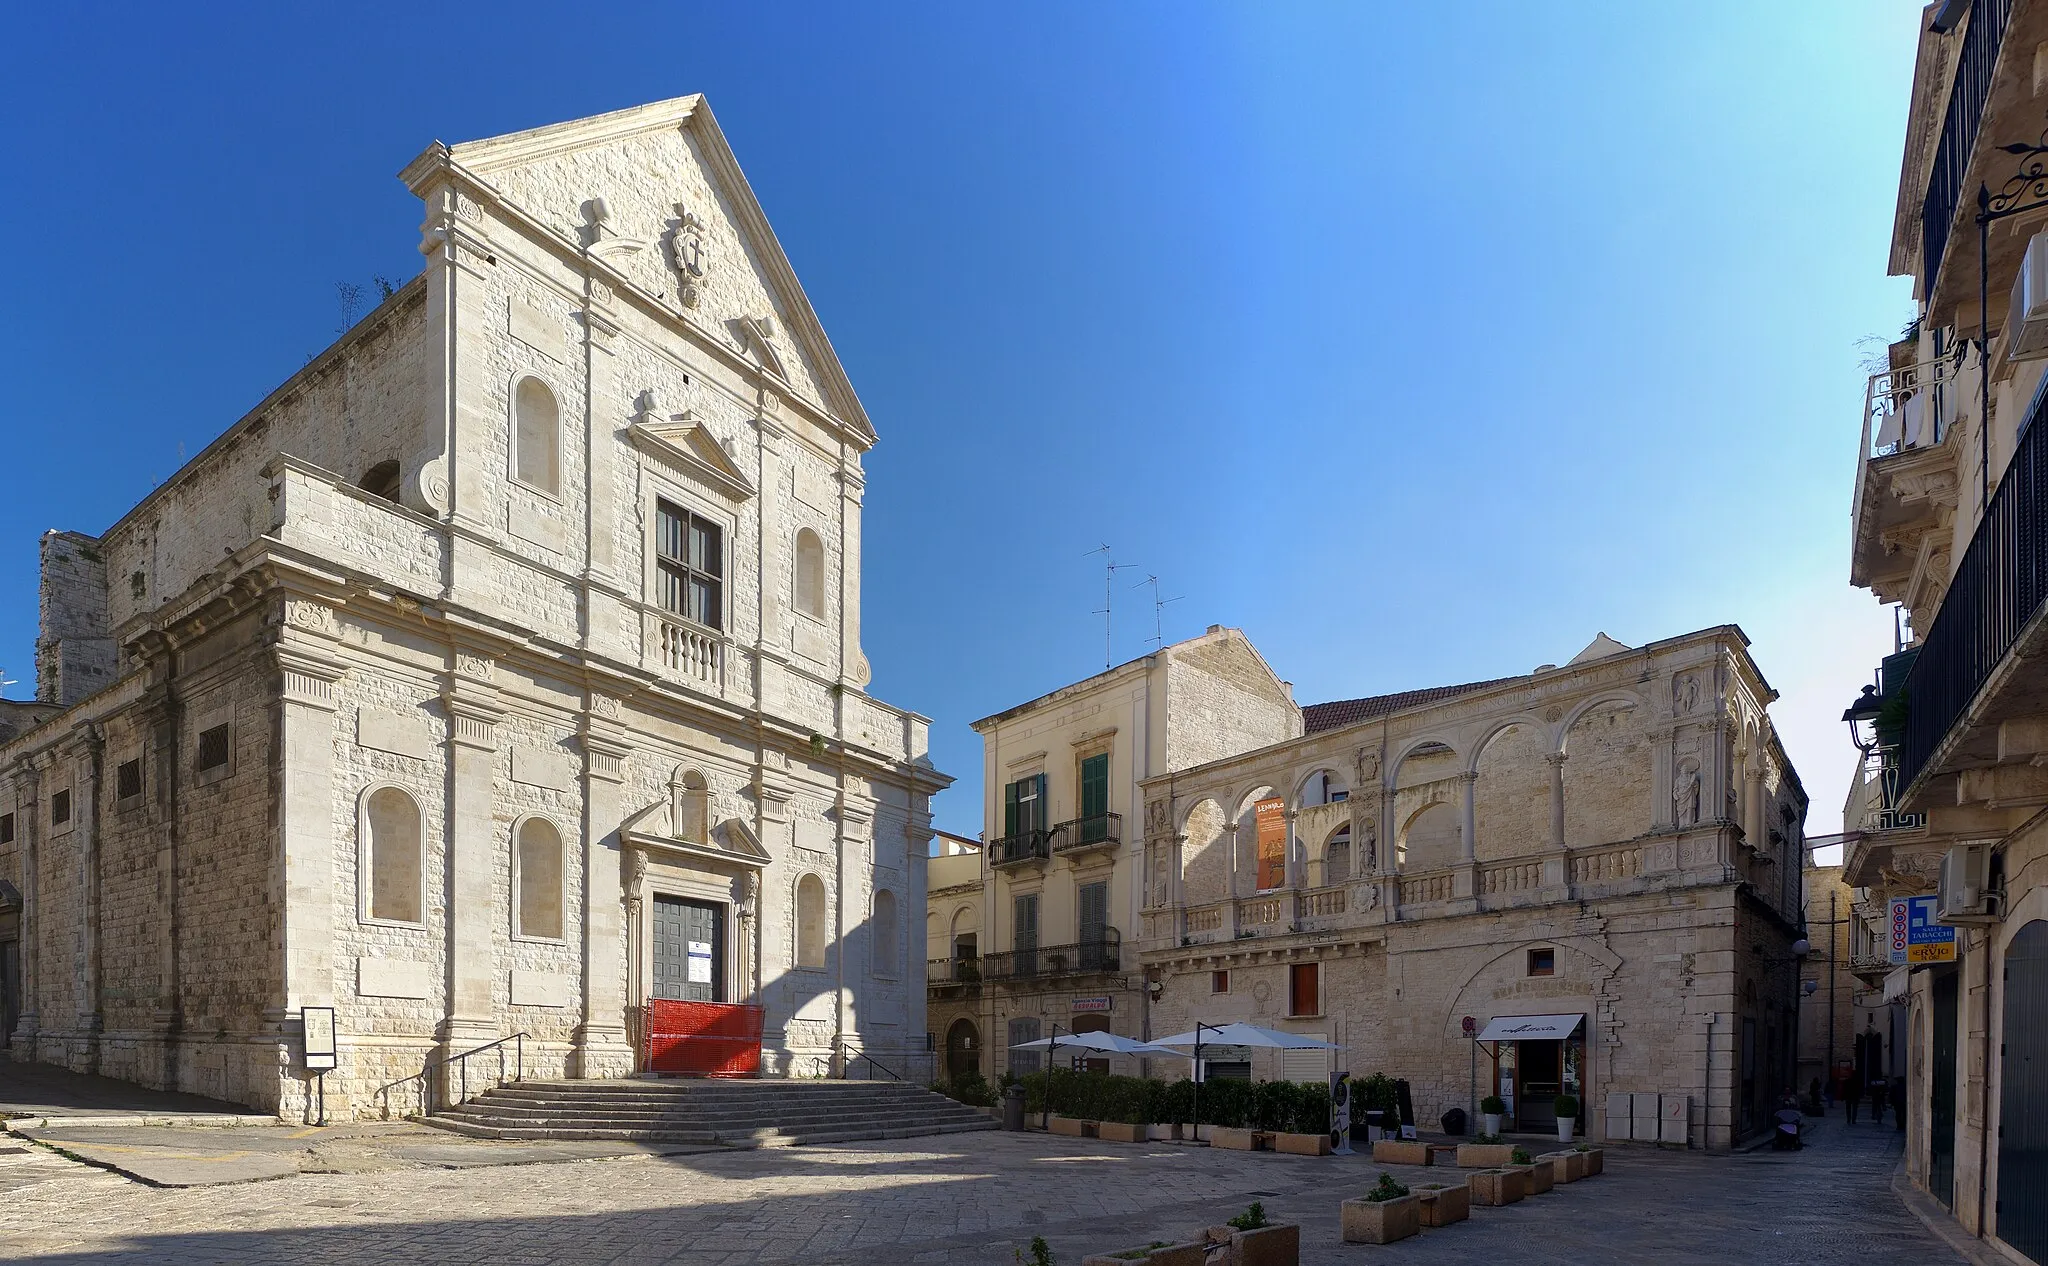 Photo showing: Italy, Bitonto, Piazza Cavour